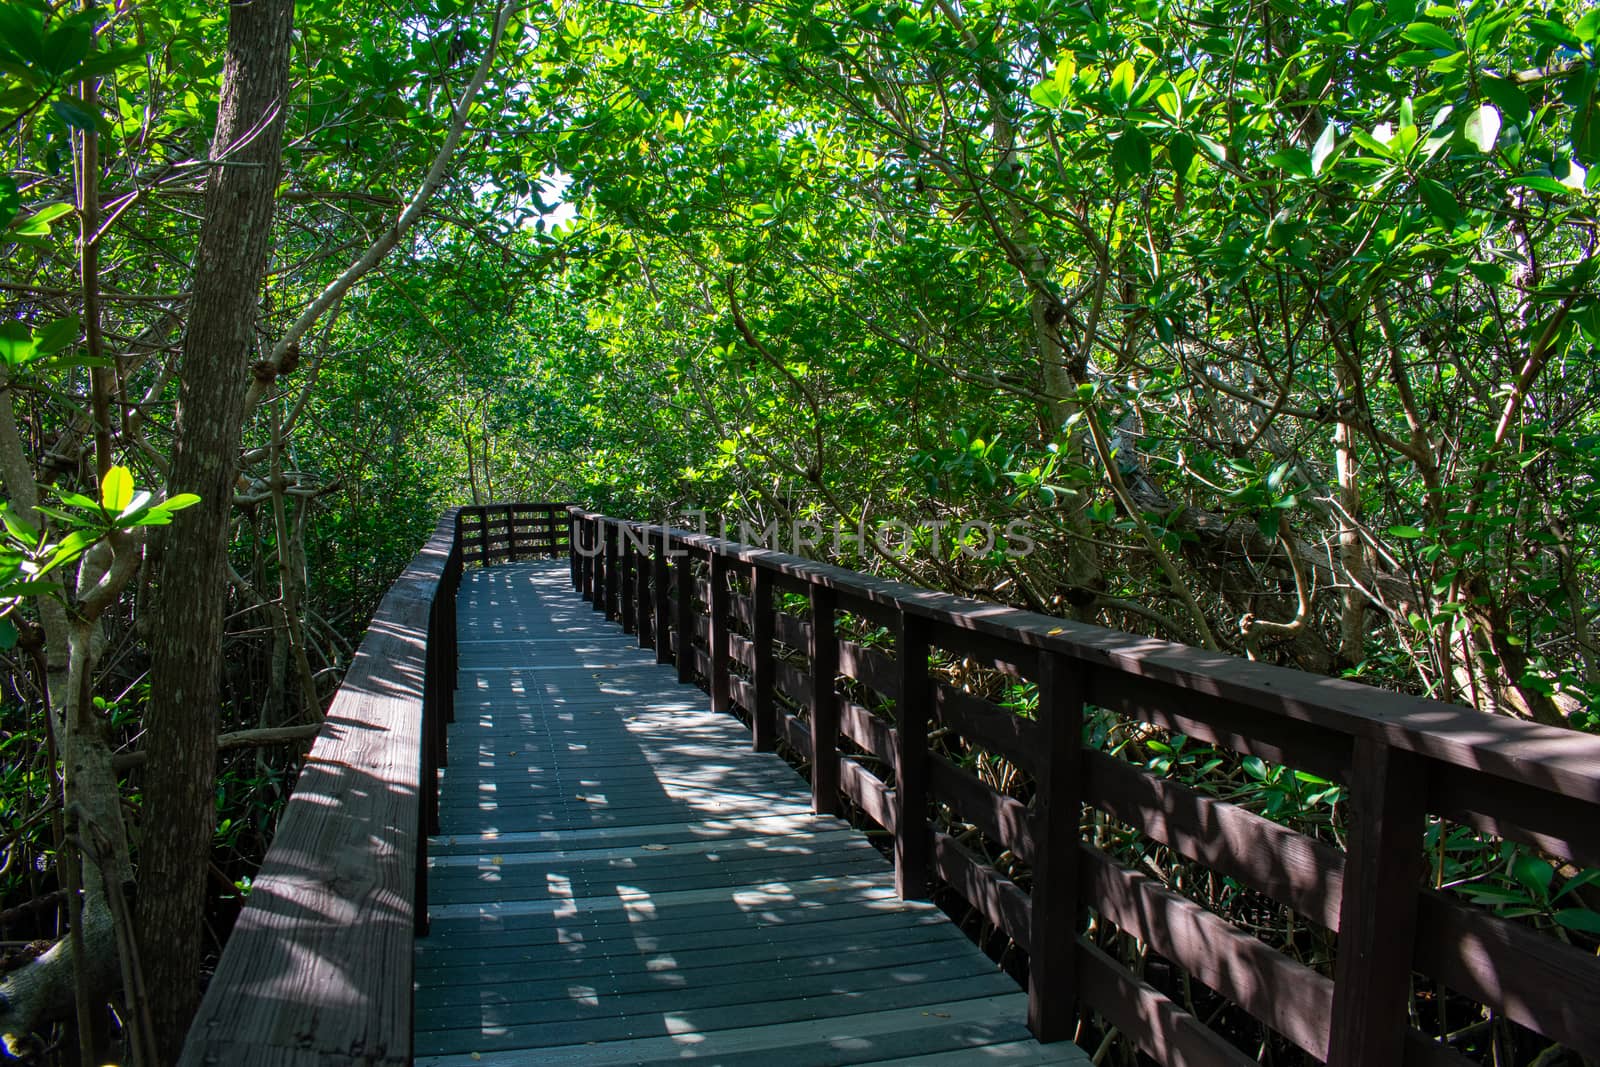 A Boardwalk Going Through a Lush and Bright Green Forest